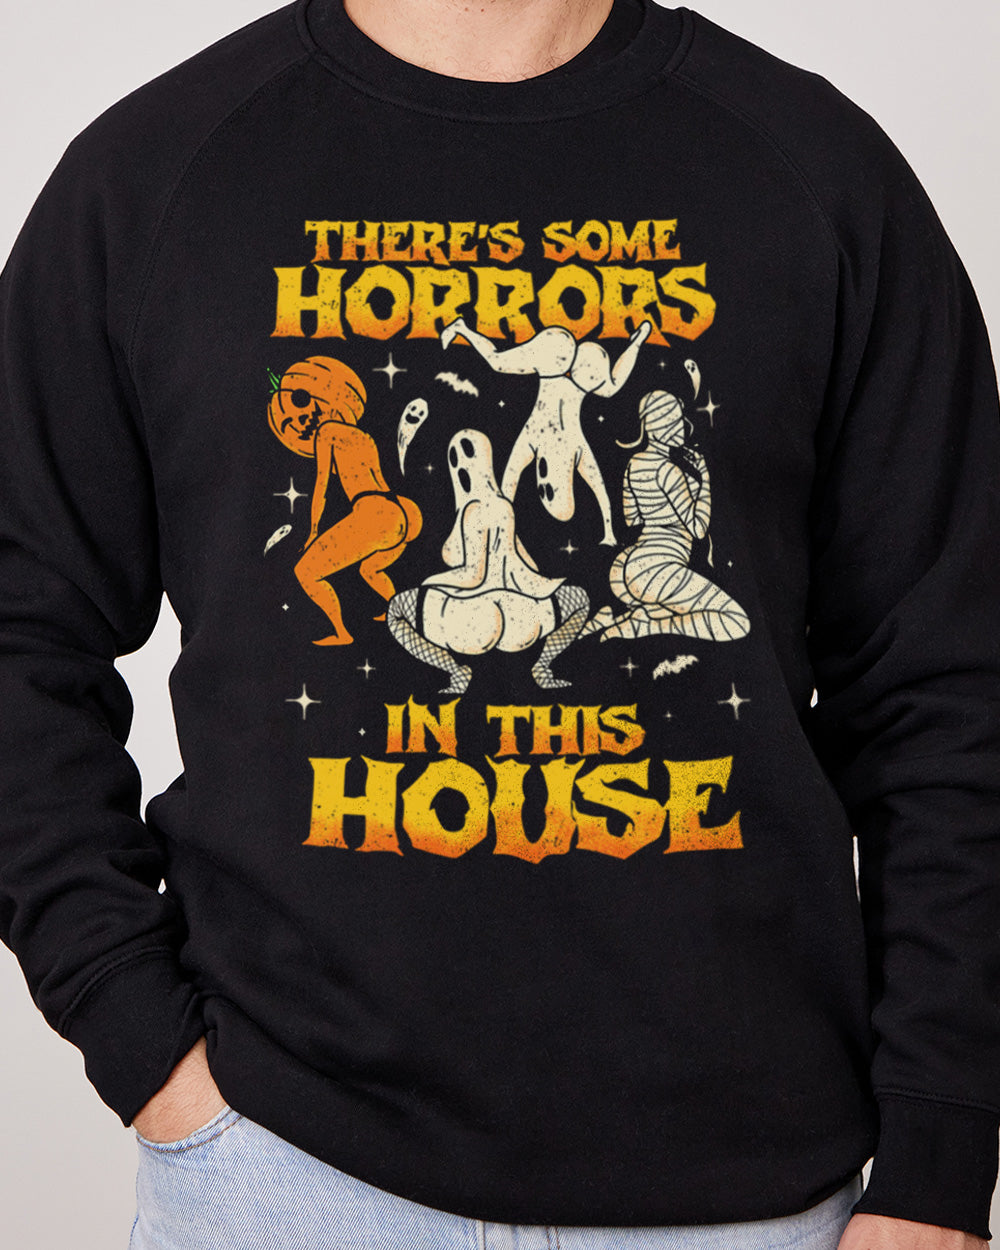 There's Some Horrors In This House Jumper Europe Online Black